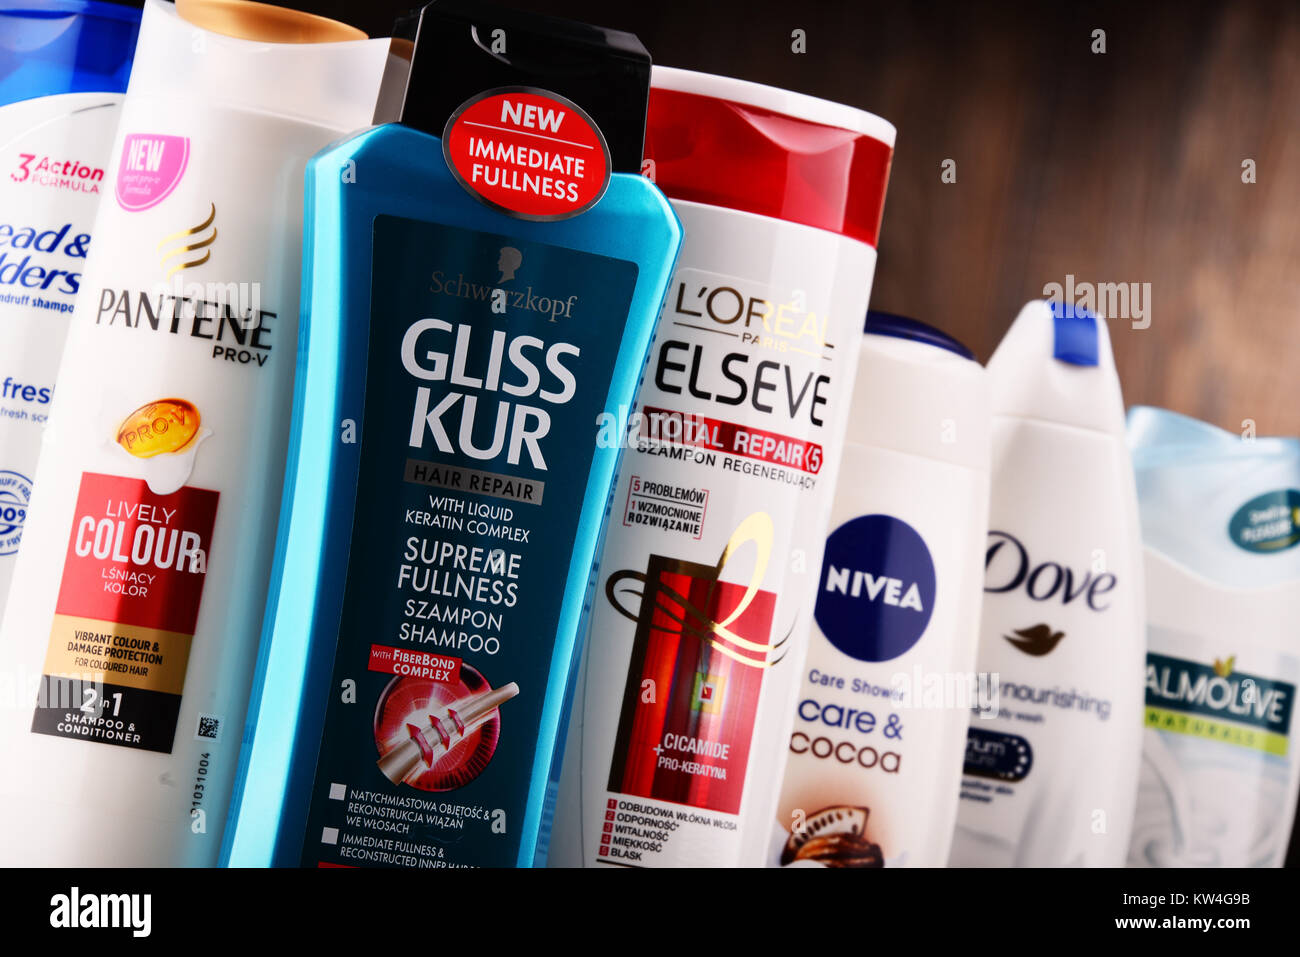 POZNAN, POLAND - DEC 7, 2017: Plastic containers of body care products including widely available most popular global brands as LOreal, Nivea, Dove, P Stock Photo